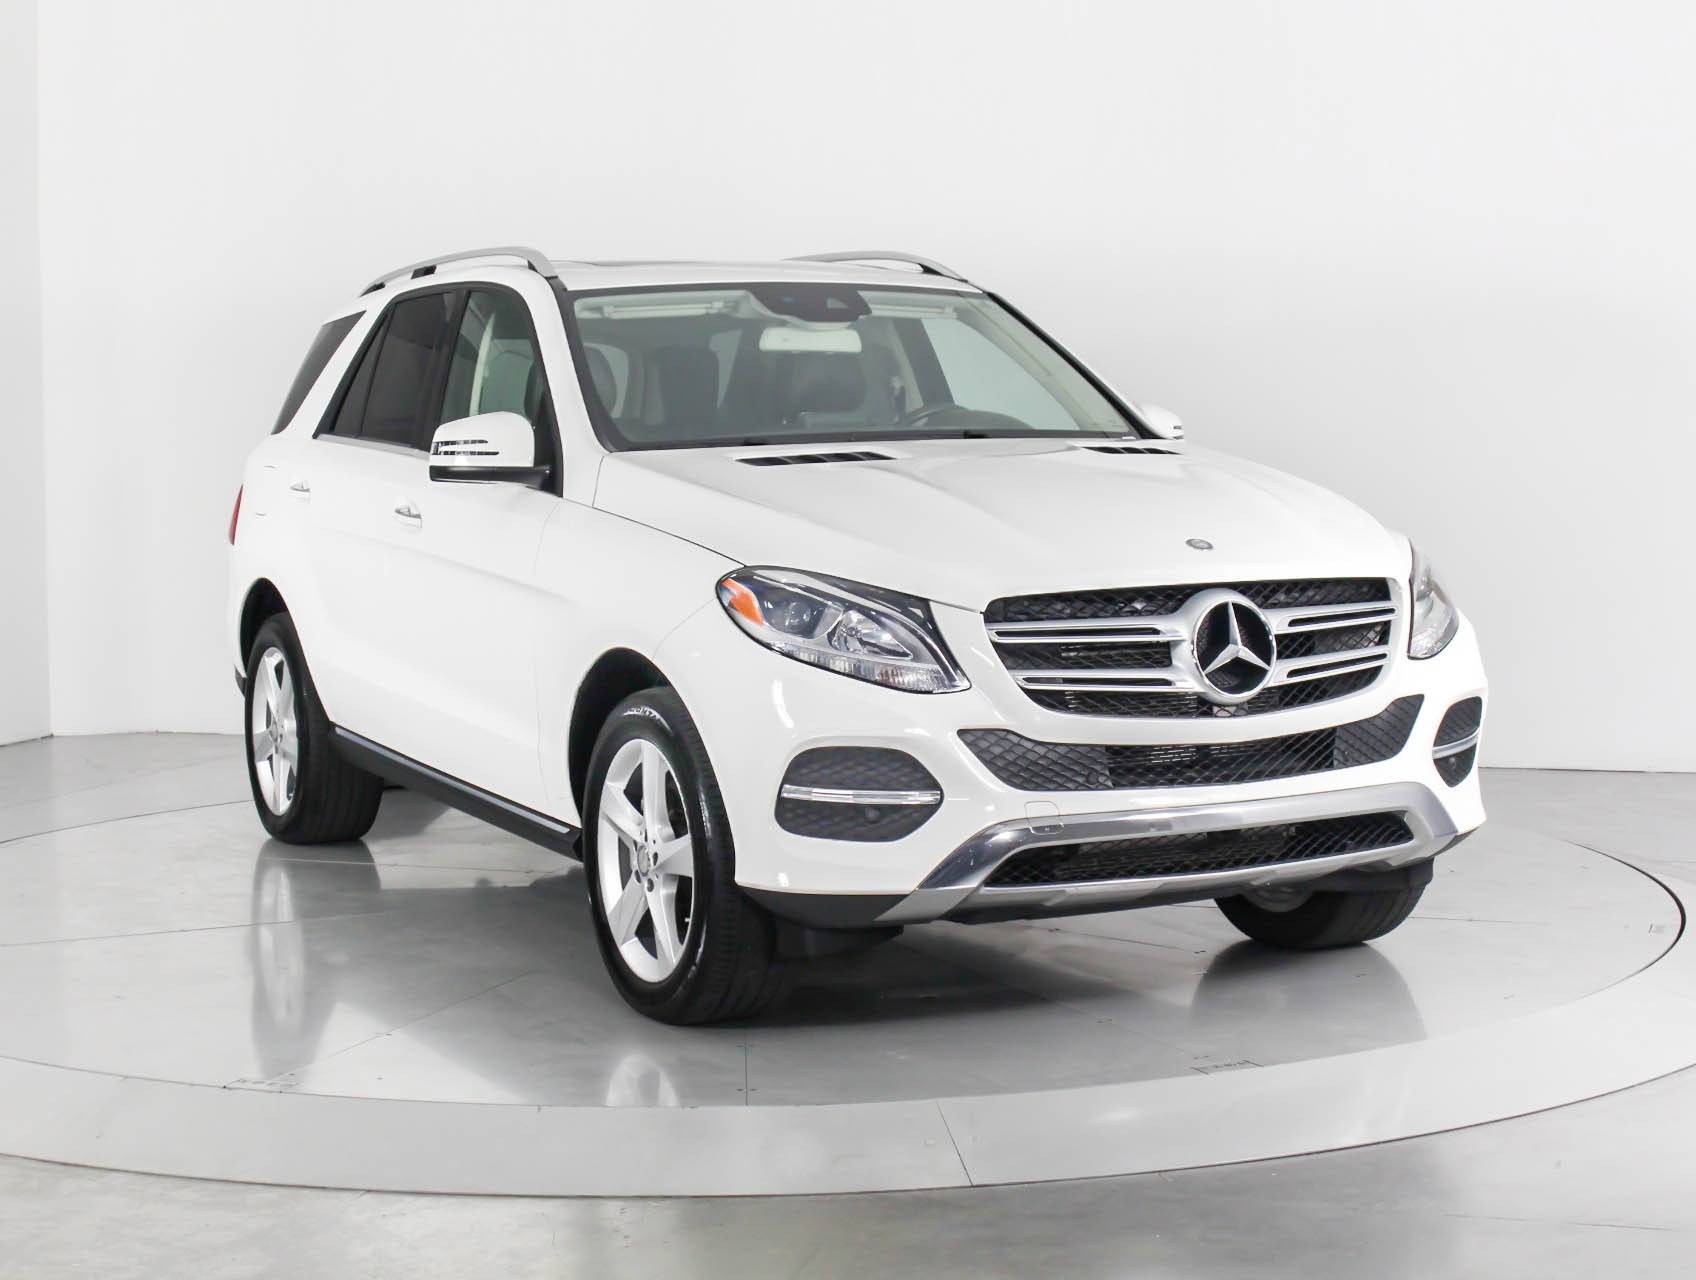 Florida Fine Cars - Used MERCEDES-BENZ GLE CLASS 2017 WEST PALM GLE350